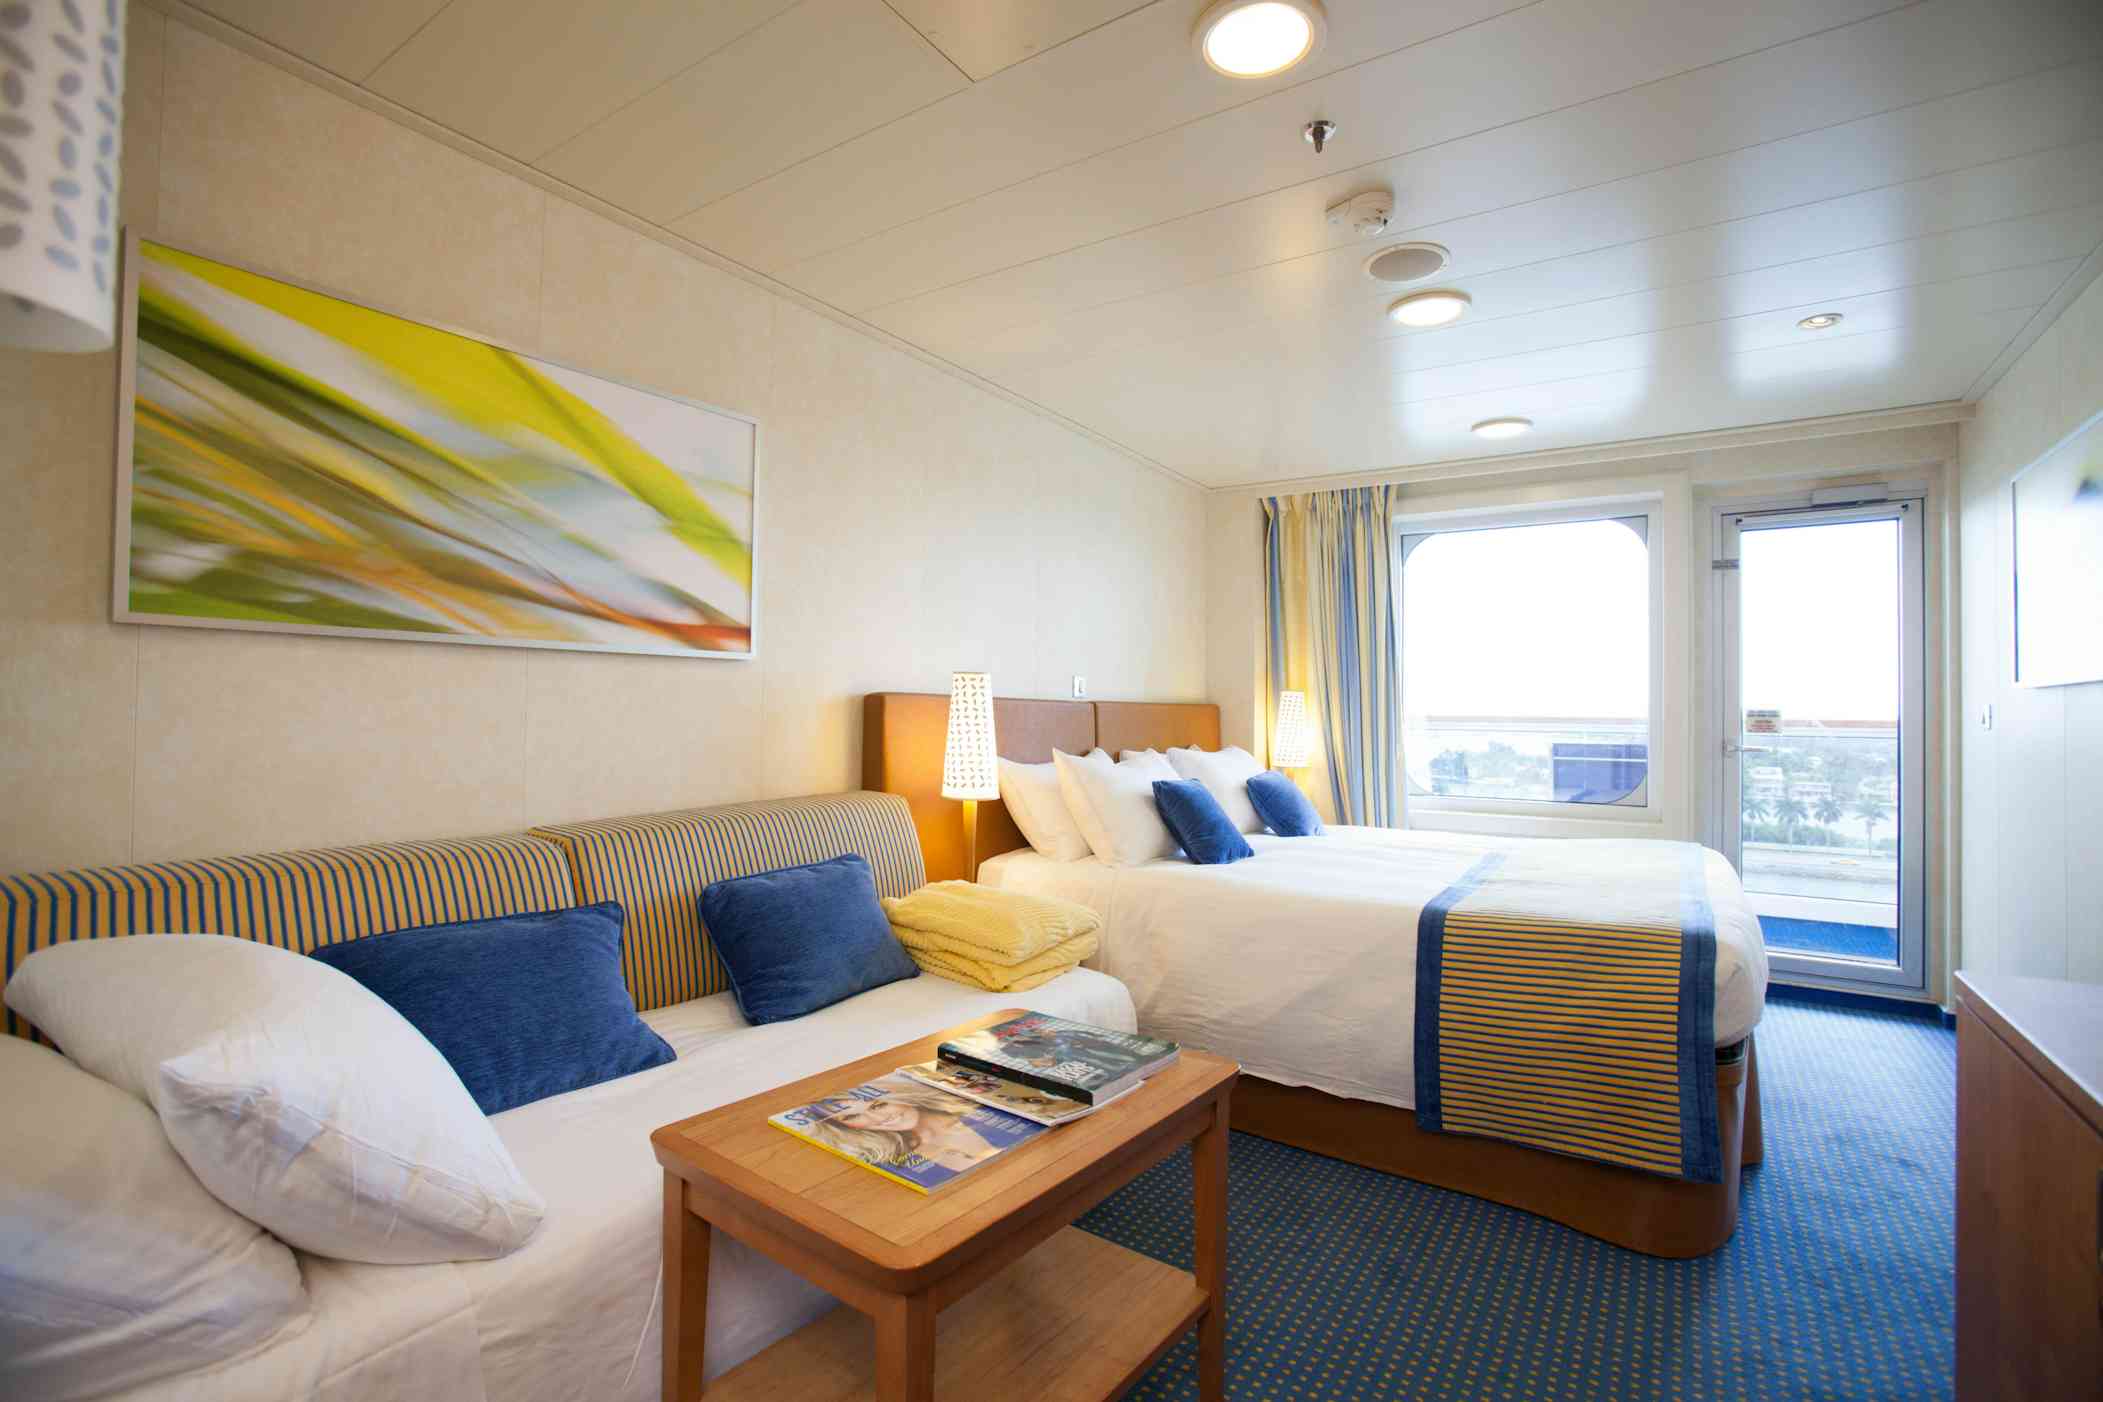 Cruise Ship Rooms: How to Choose the Cabin That's Right for You